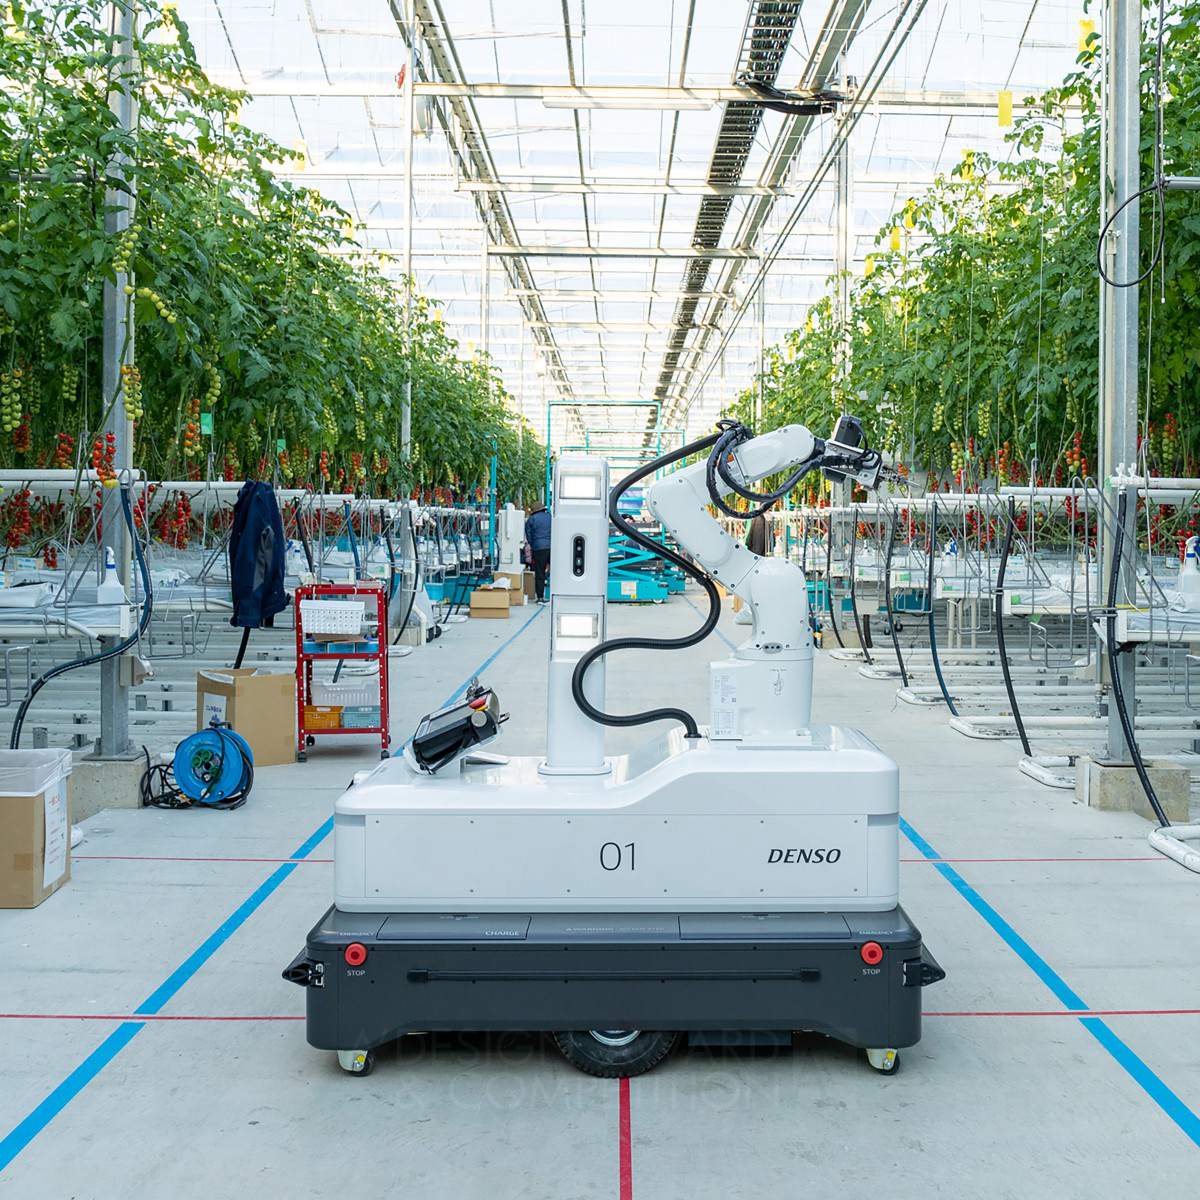 Automatic Harvester Robot by DENSO DESIGN